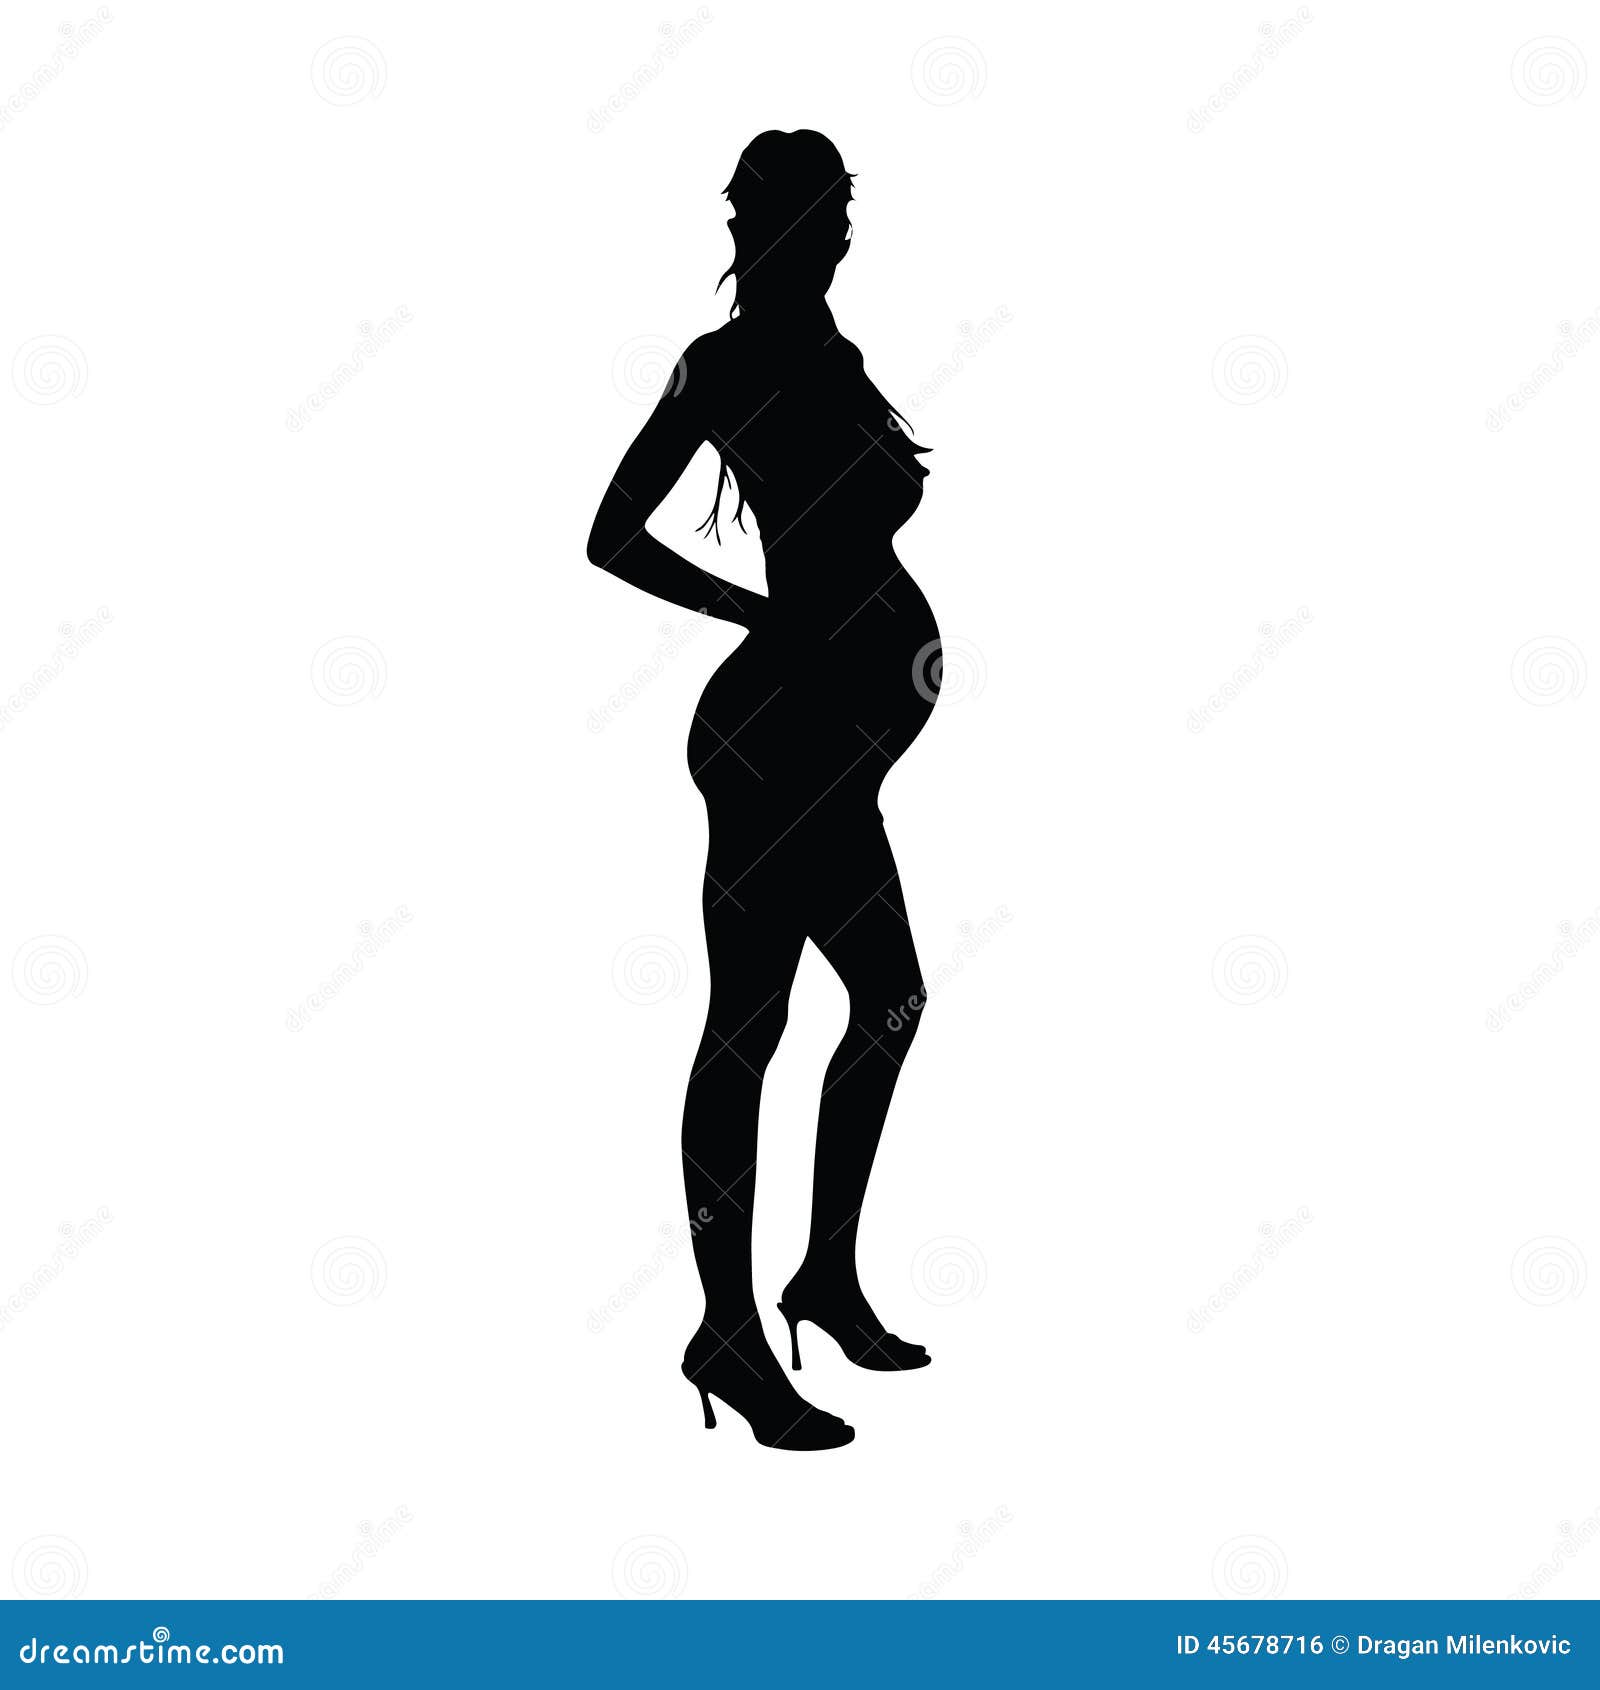 Download Expectant Mother Vector Silhouette Illustration Stock ...